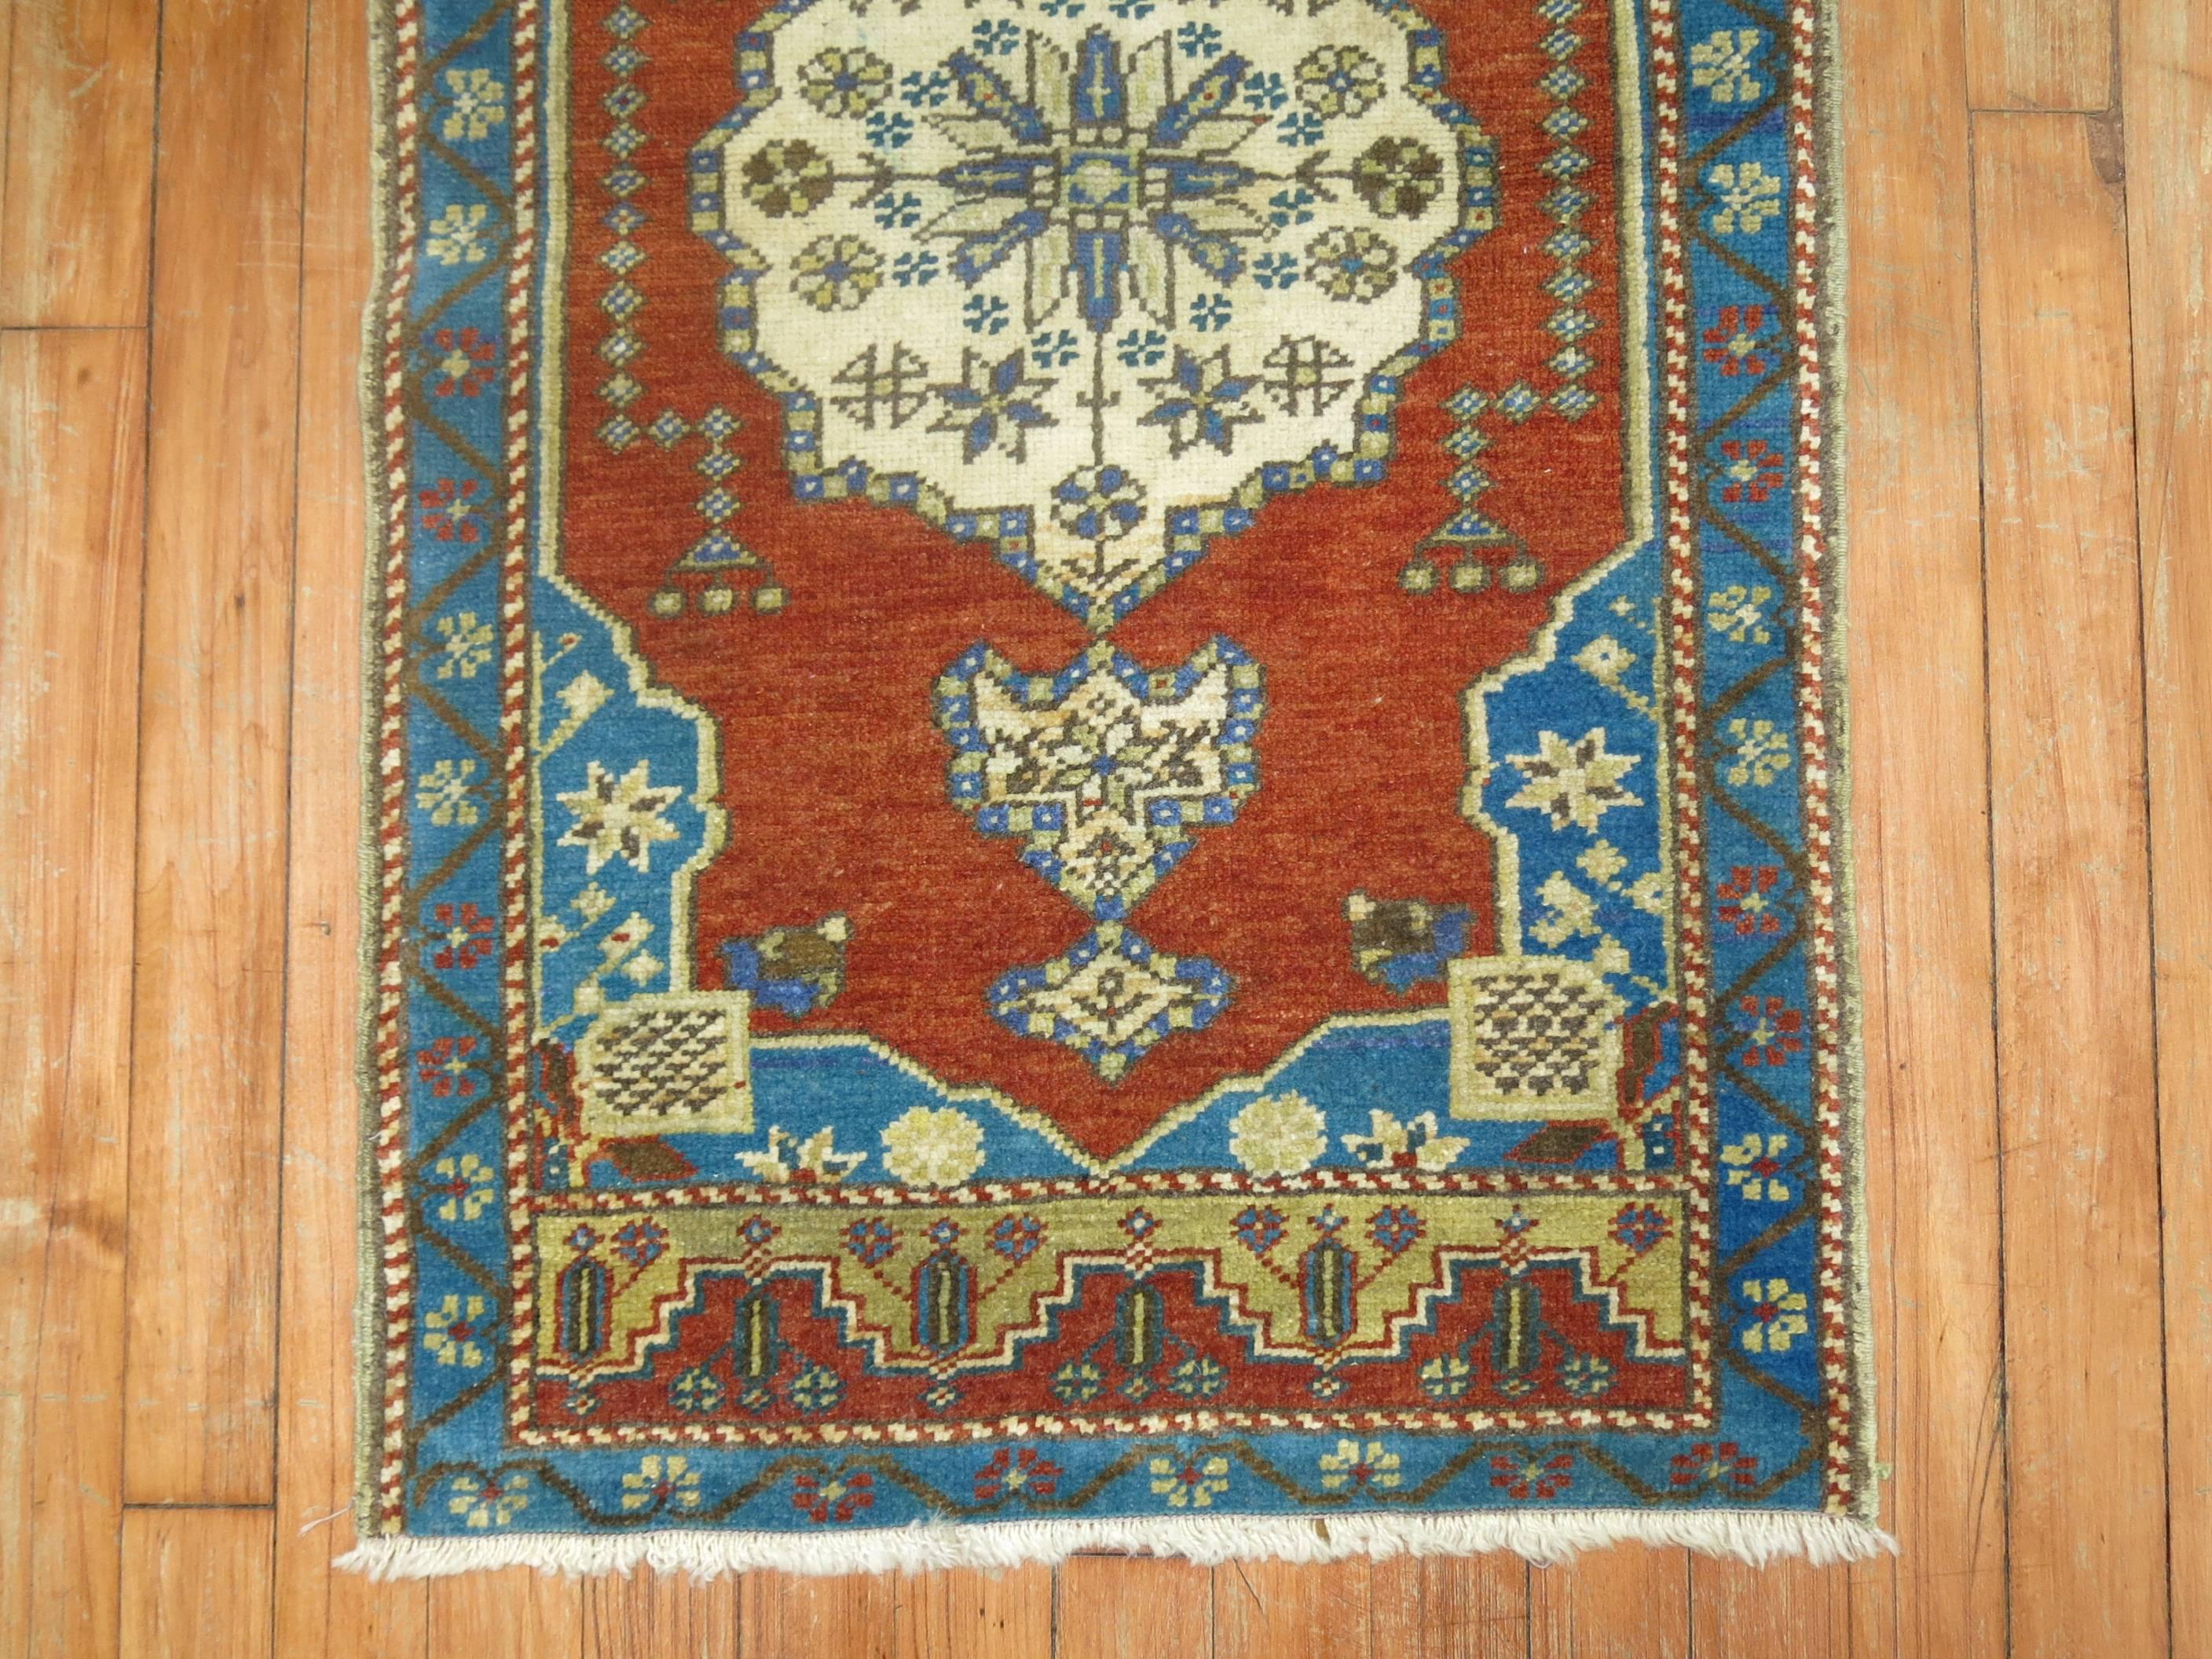 Turkish rug with masculine vibes.